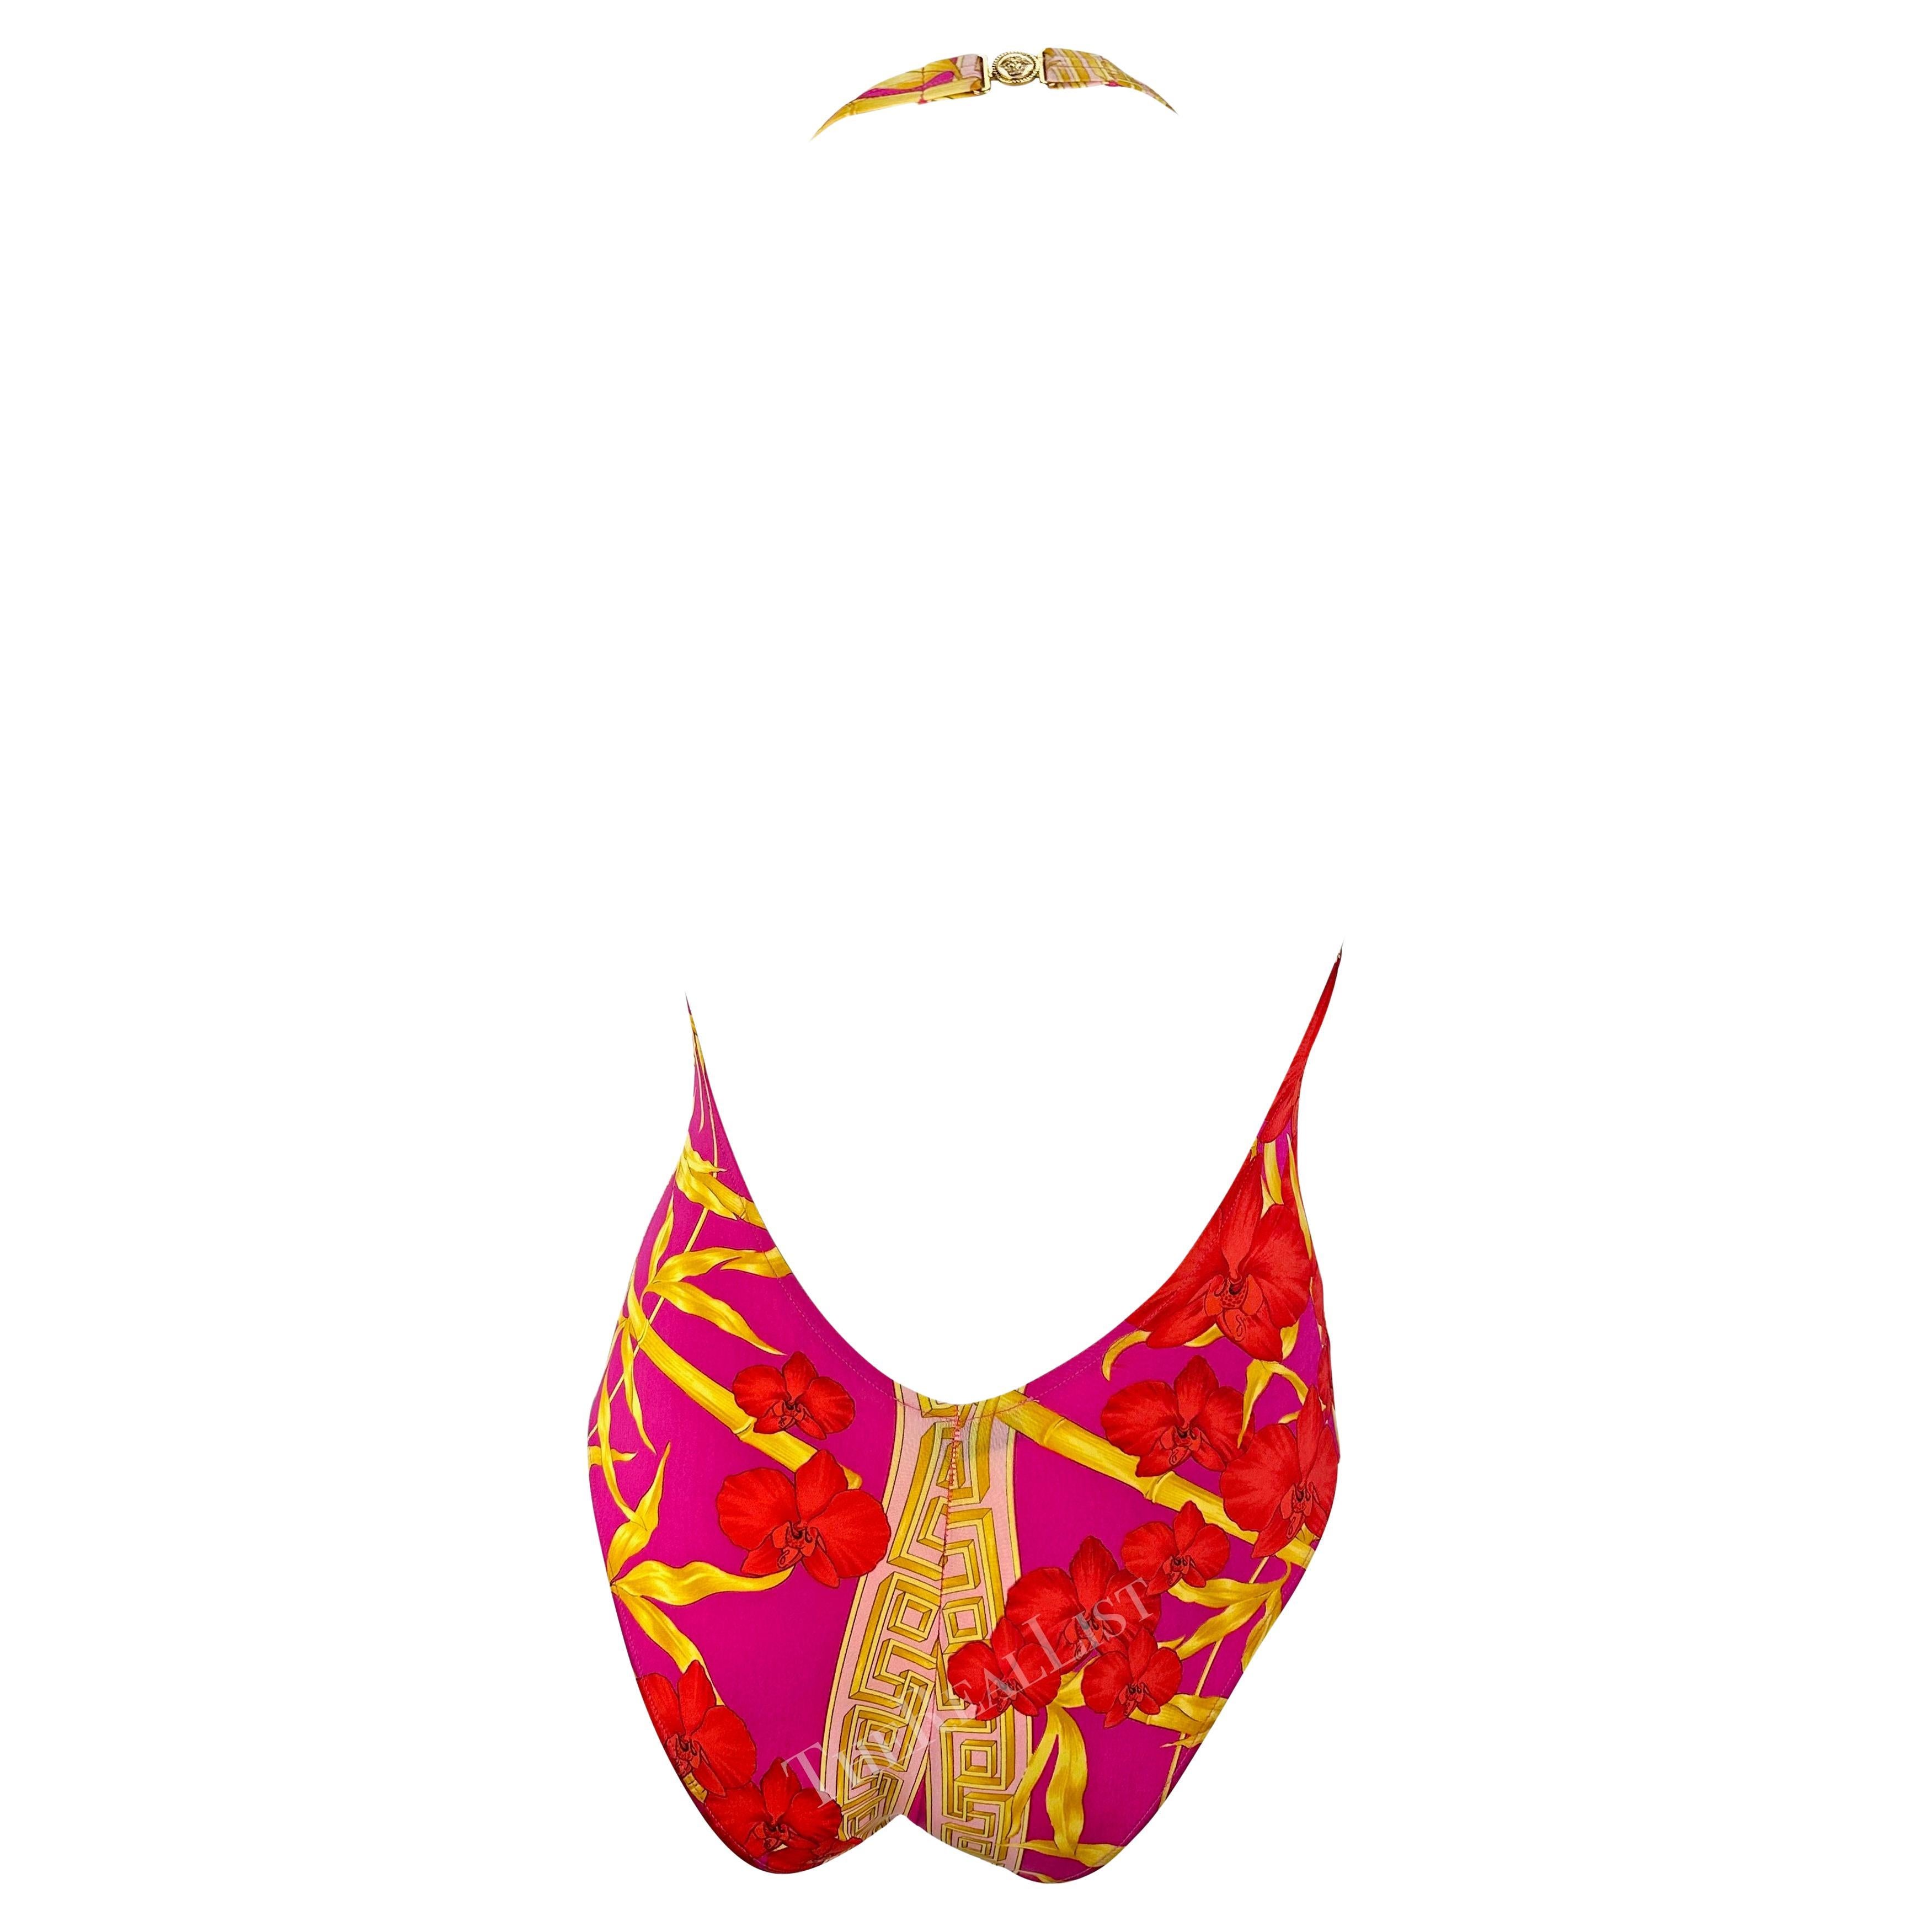 Women's S/S 2000 Versace by Donatella Hot Pink Bamboo Plunging Halter One-Piece Swimsuit For Sale